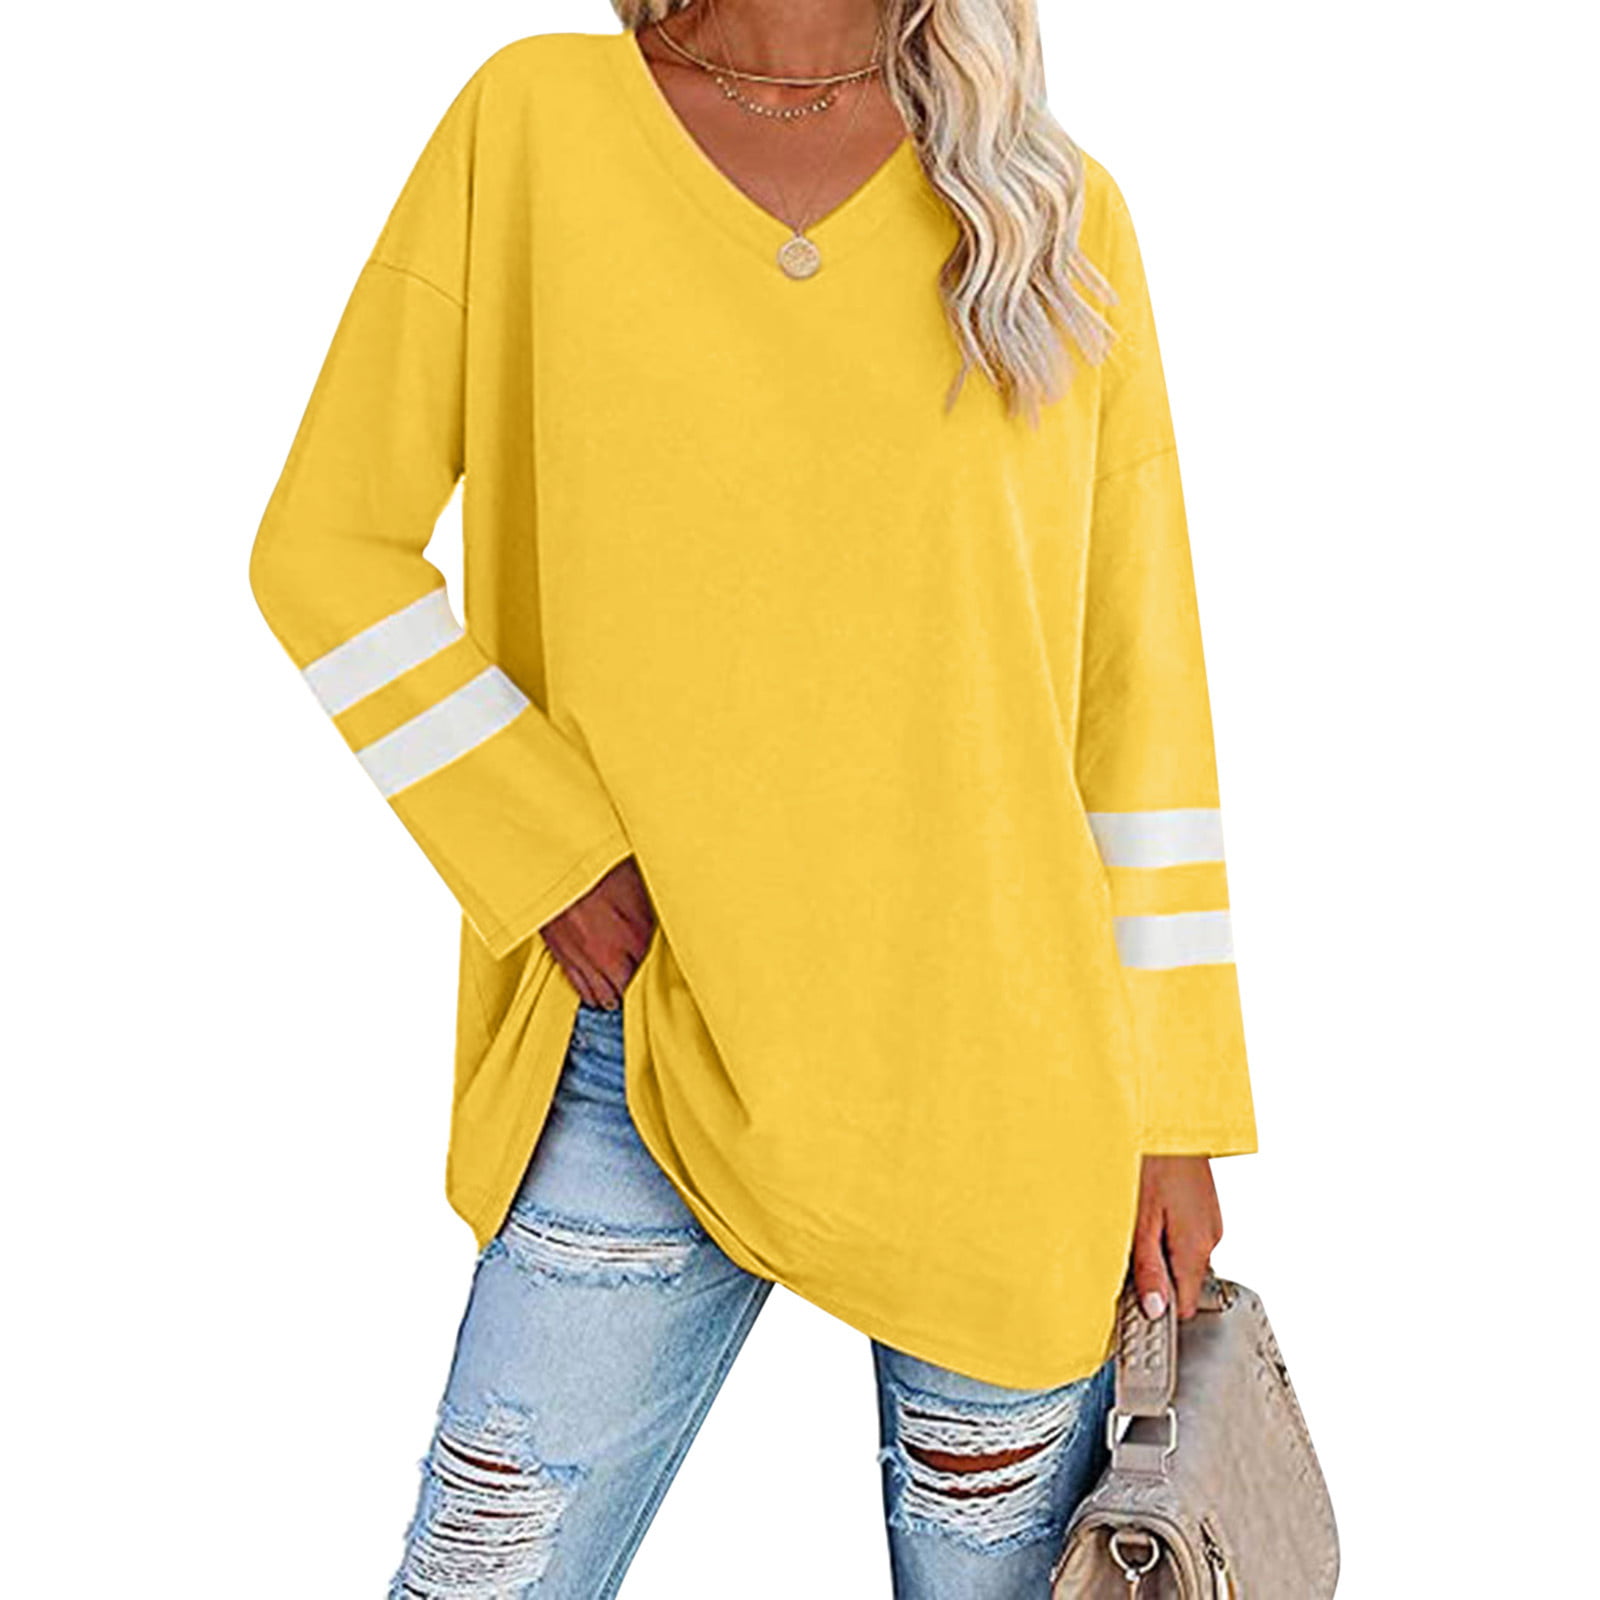 LBECLEY Shirts Long Sleeved Womens Long Sleeve Tops Oversized T Shirts  Striped Shirts Crew Neck Tops Soft Causal Loose Blouse Women Sports Top  Dark Gray Xxl 